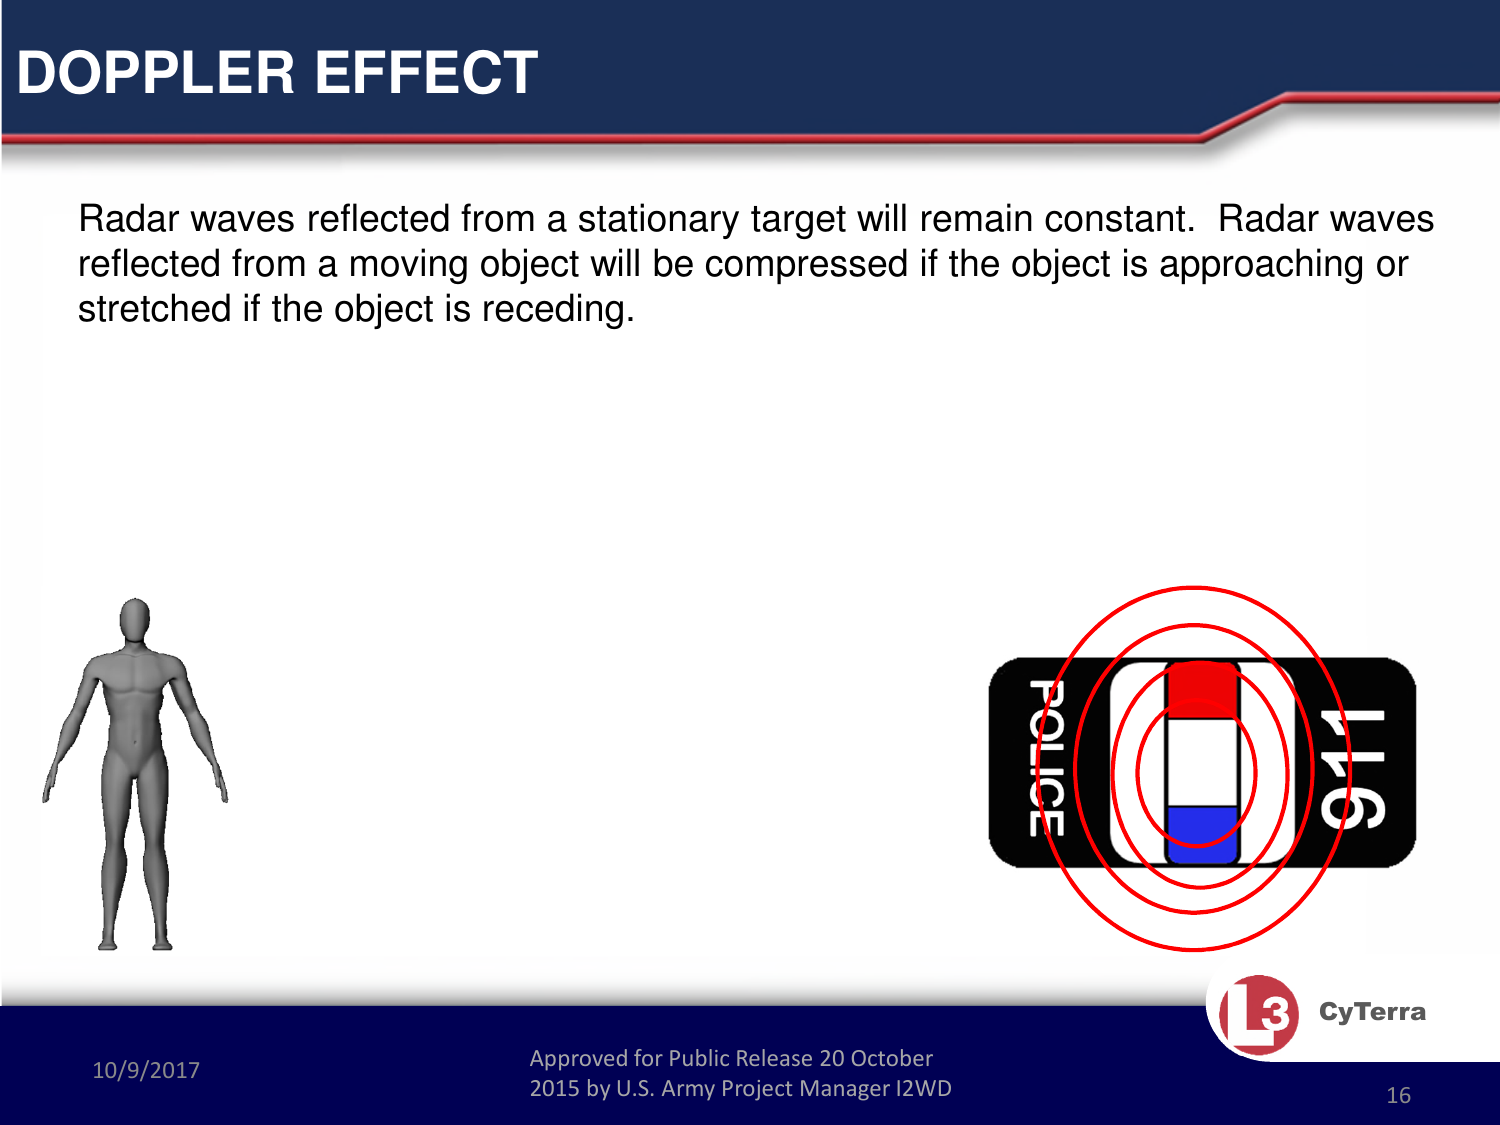 Approved for Public Release 20 October 2015 by U.S. Army Project Manager I2WD10/9/2017 Approved for Public Release 20 October 2015 by U.S. Army Project Manager I2WD 16CyTerraDOPPLER EFFECTRadar waves reflected from a stationary target will remain constant.  Radar waves reflected from a moving object will be compressed if the object is approaching or stretched if the object is receding.